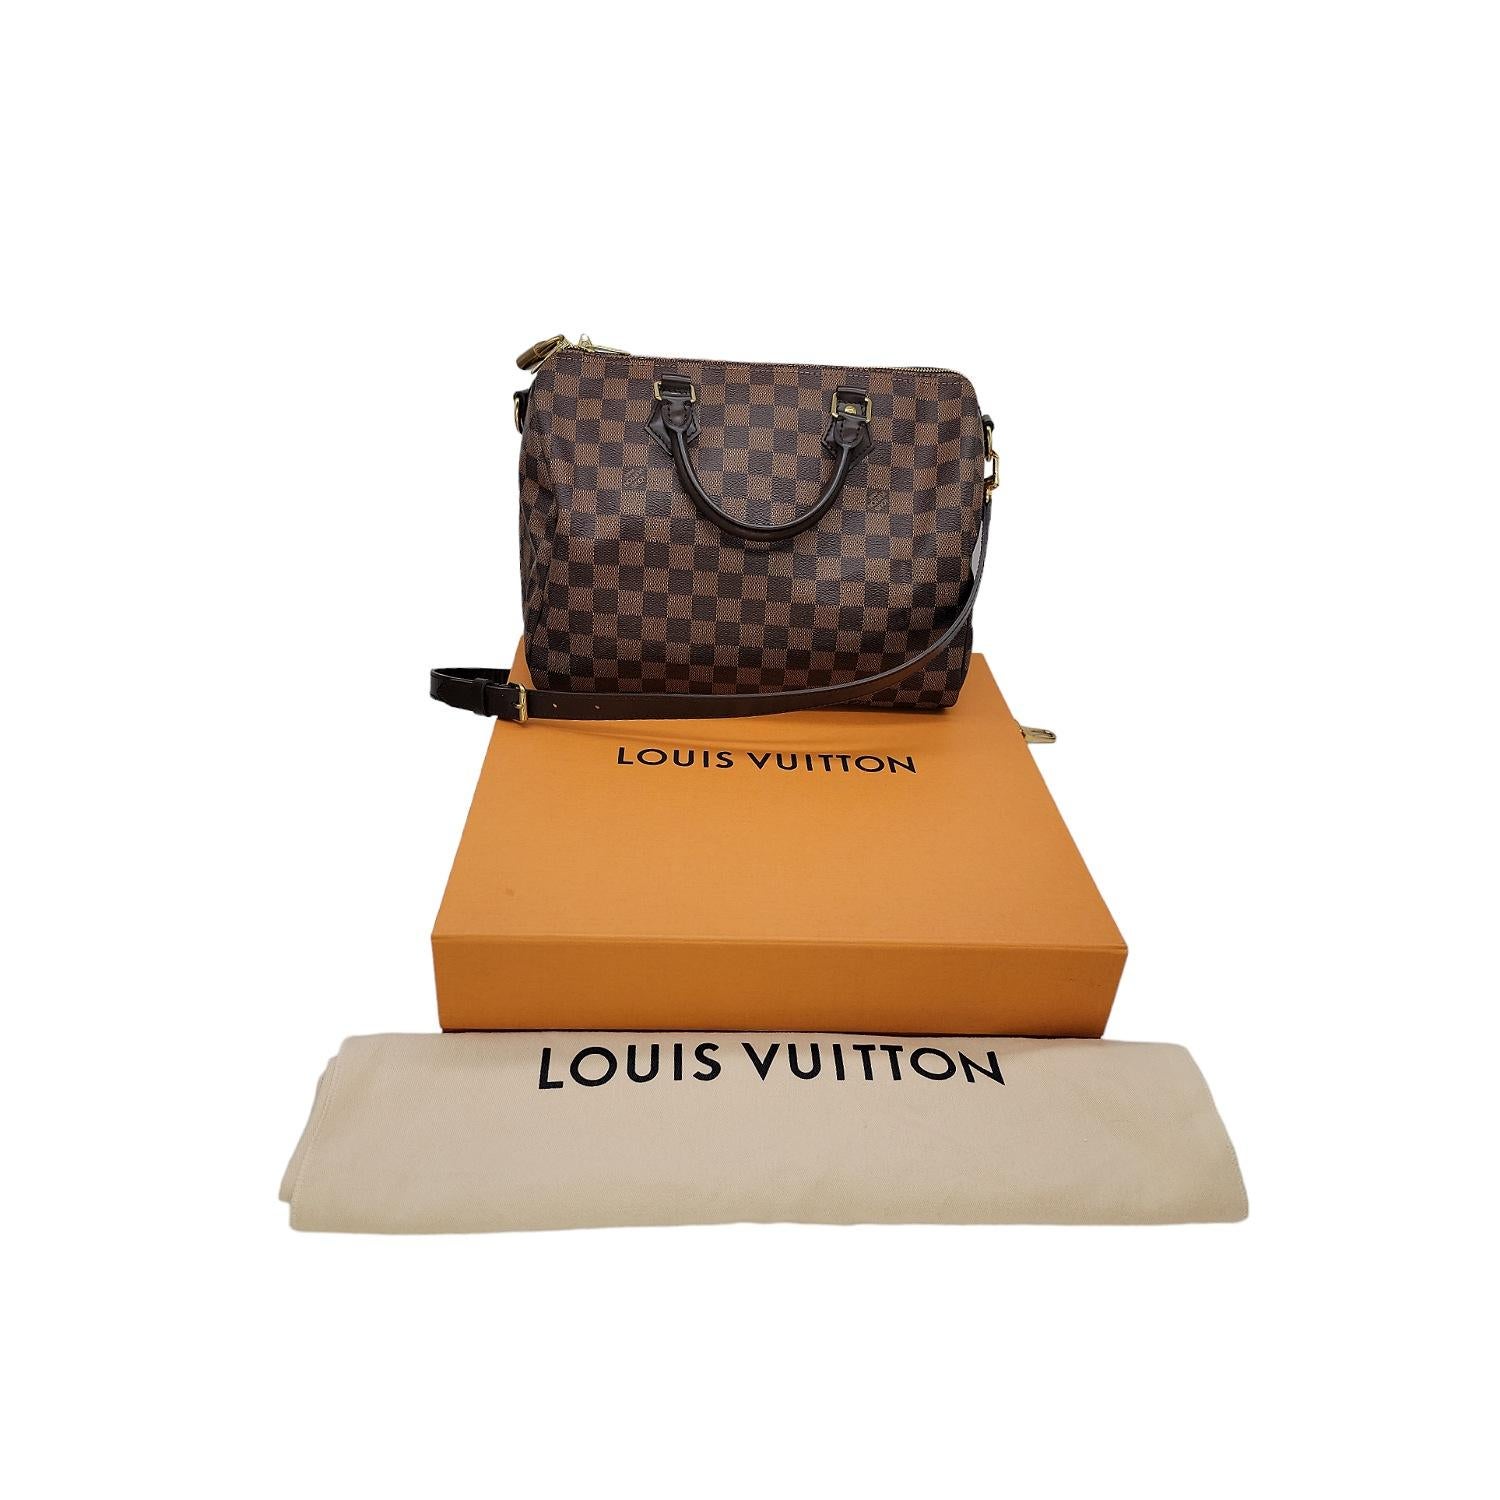 This Louis Vuitton Speedy Bandouliere 30 was made in the U.S.A. and it is finely crafted of the classic Louis Vuitton Damier Ebene coated canvas with leather trimming and gold-tone hardware features. It has dual rolled leather top handles a